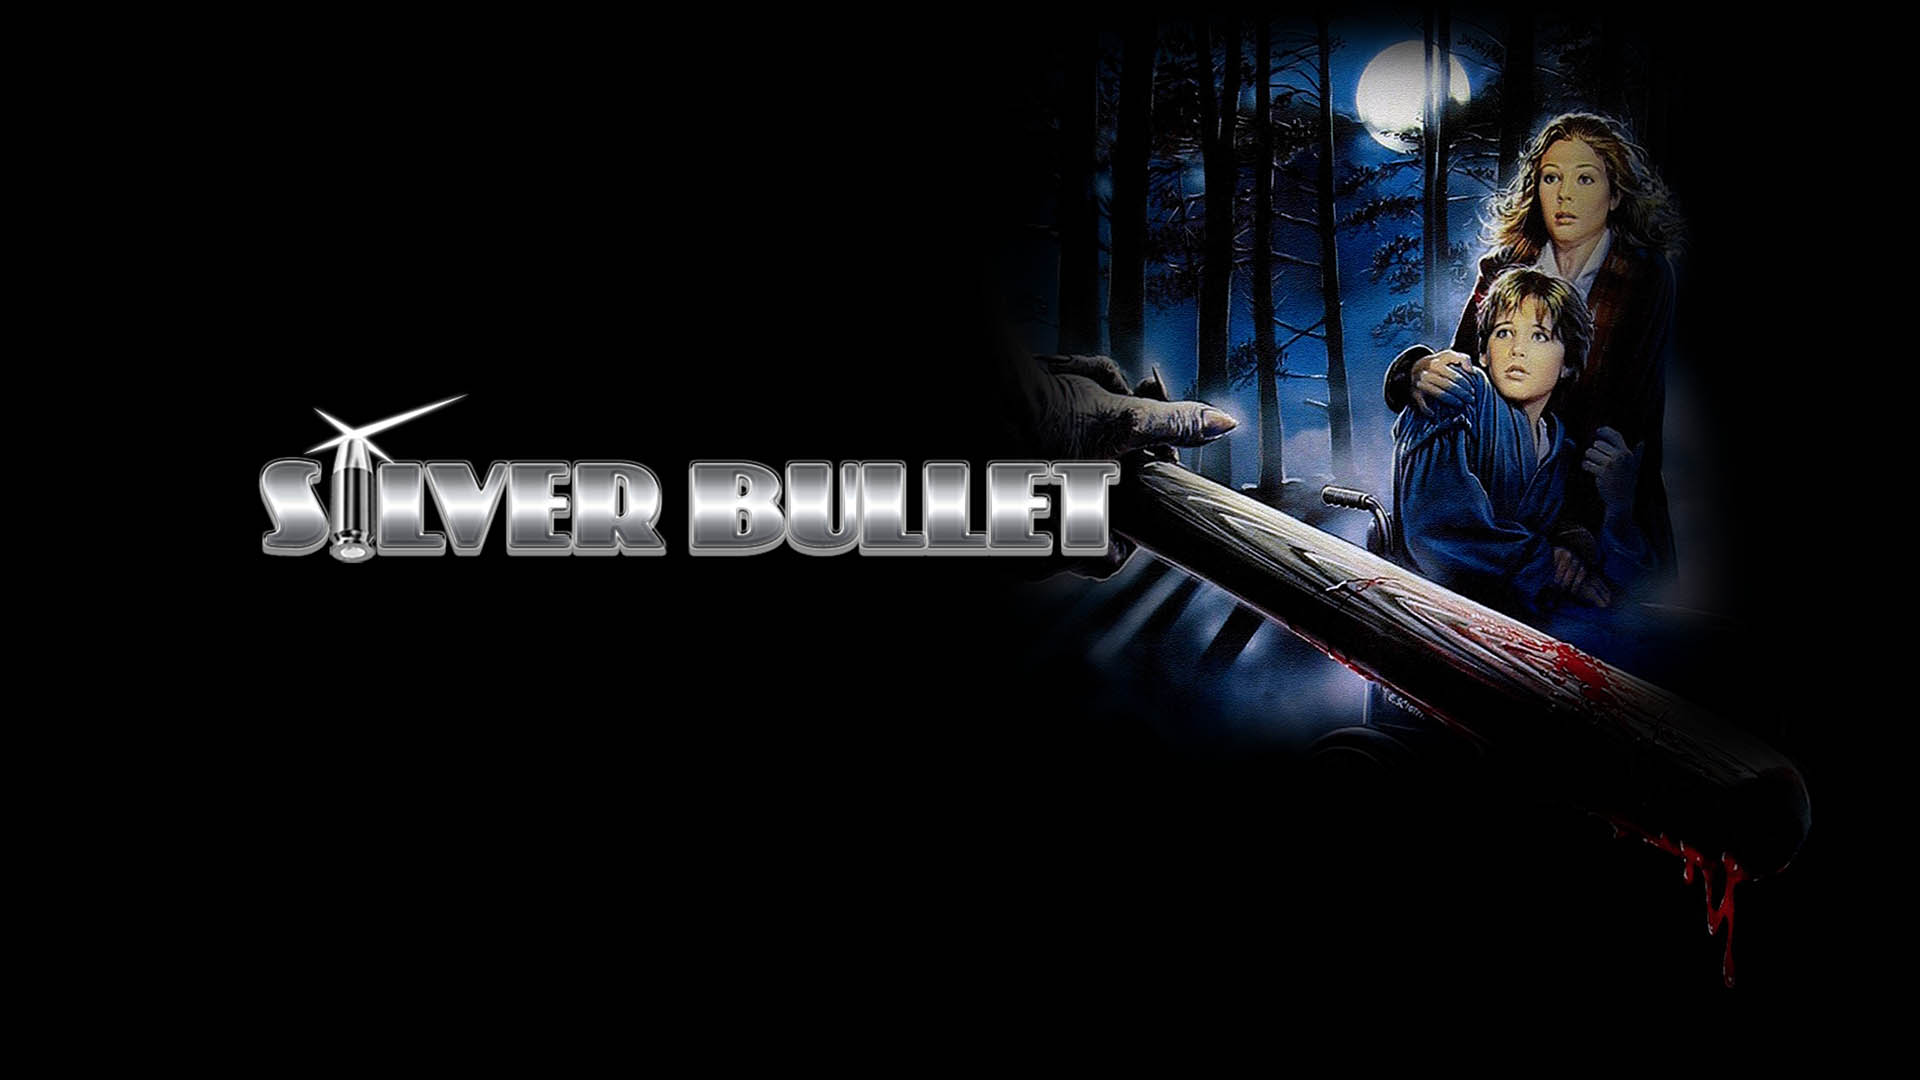 Watch Silver Bullet Online | Stream Full Movies